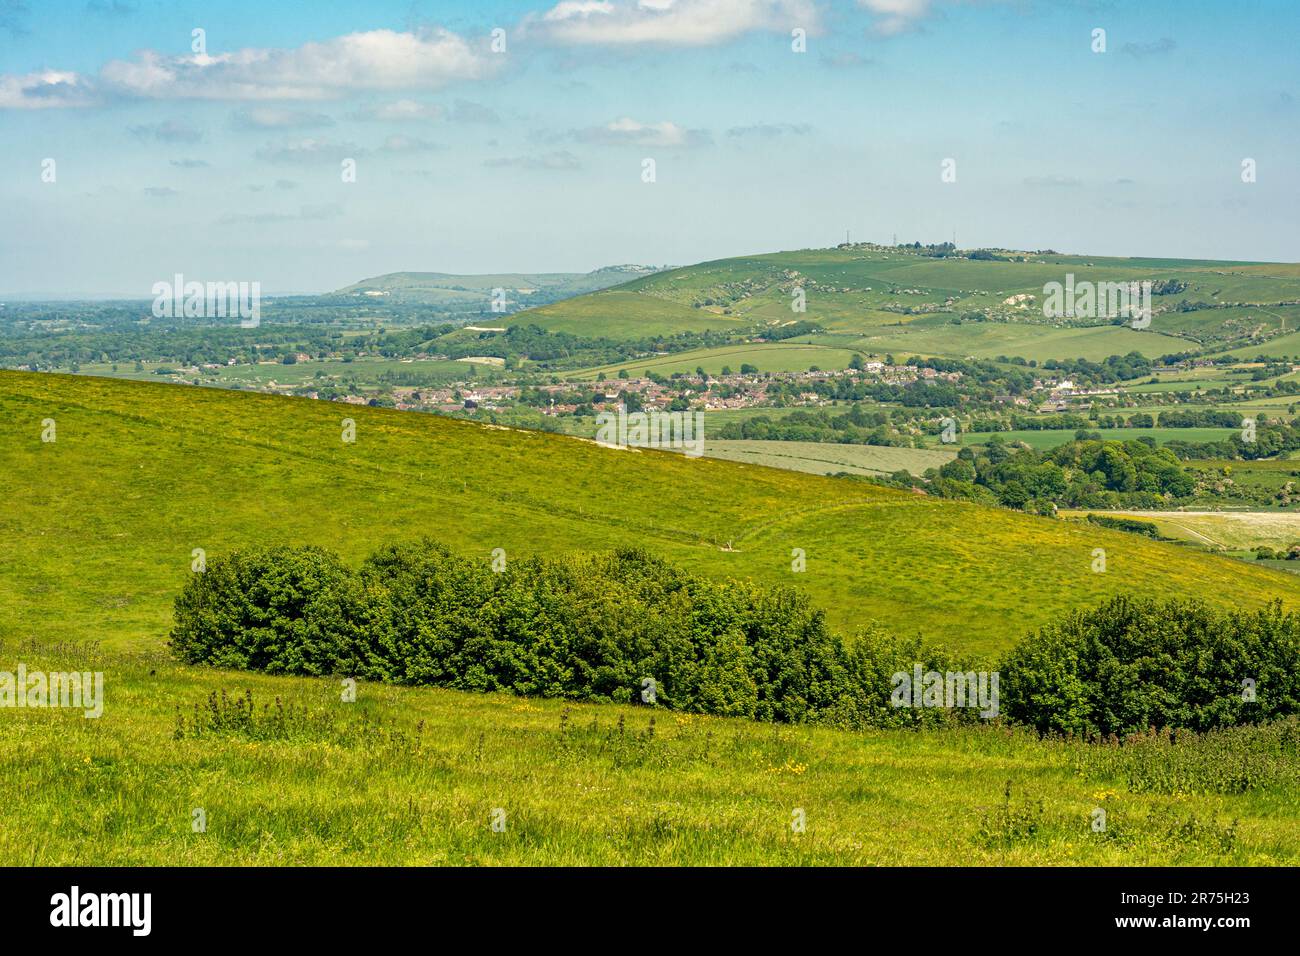 Si affaccia sullo Steyning Bowl fino a Truleigh Hill e beyong nel South Downs National Park, West Sussex, Inghilterra meridionale, Regno Unito. Foto Stock